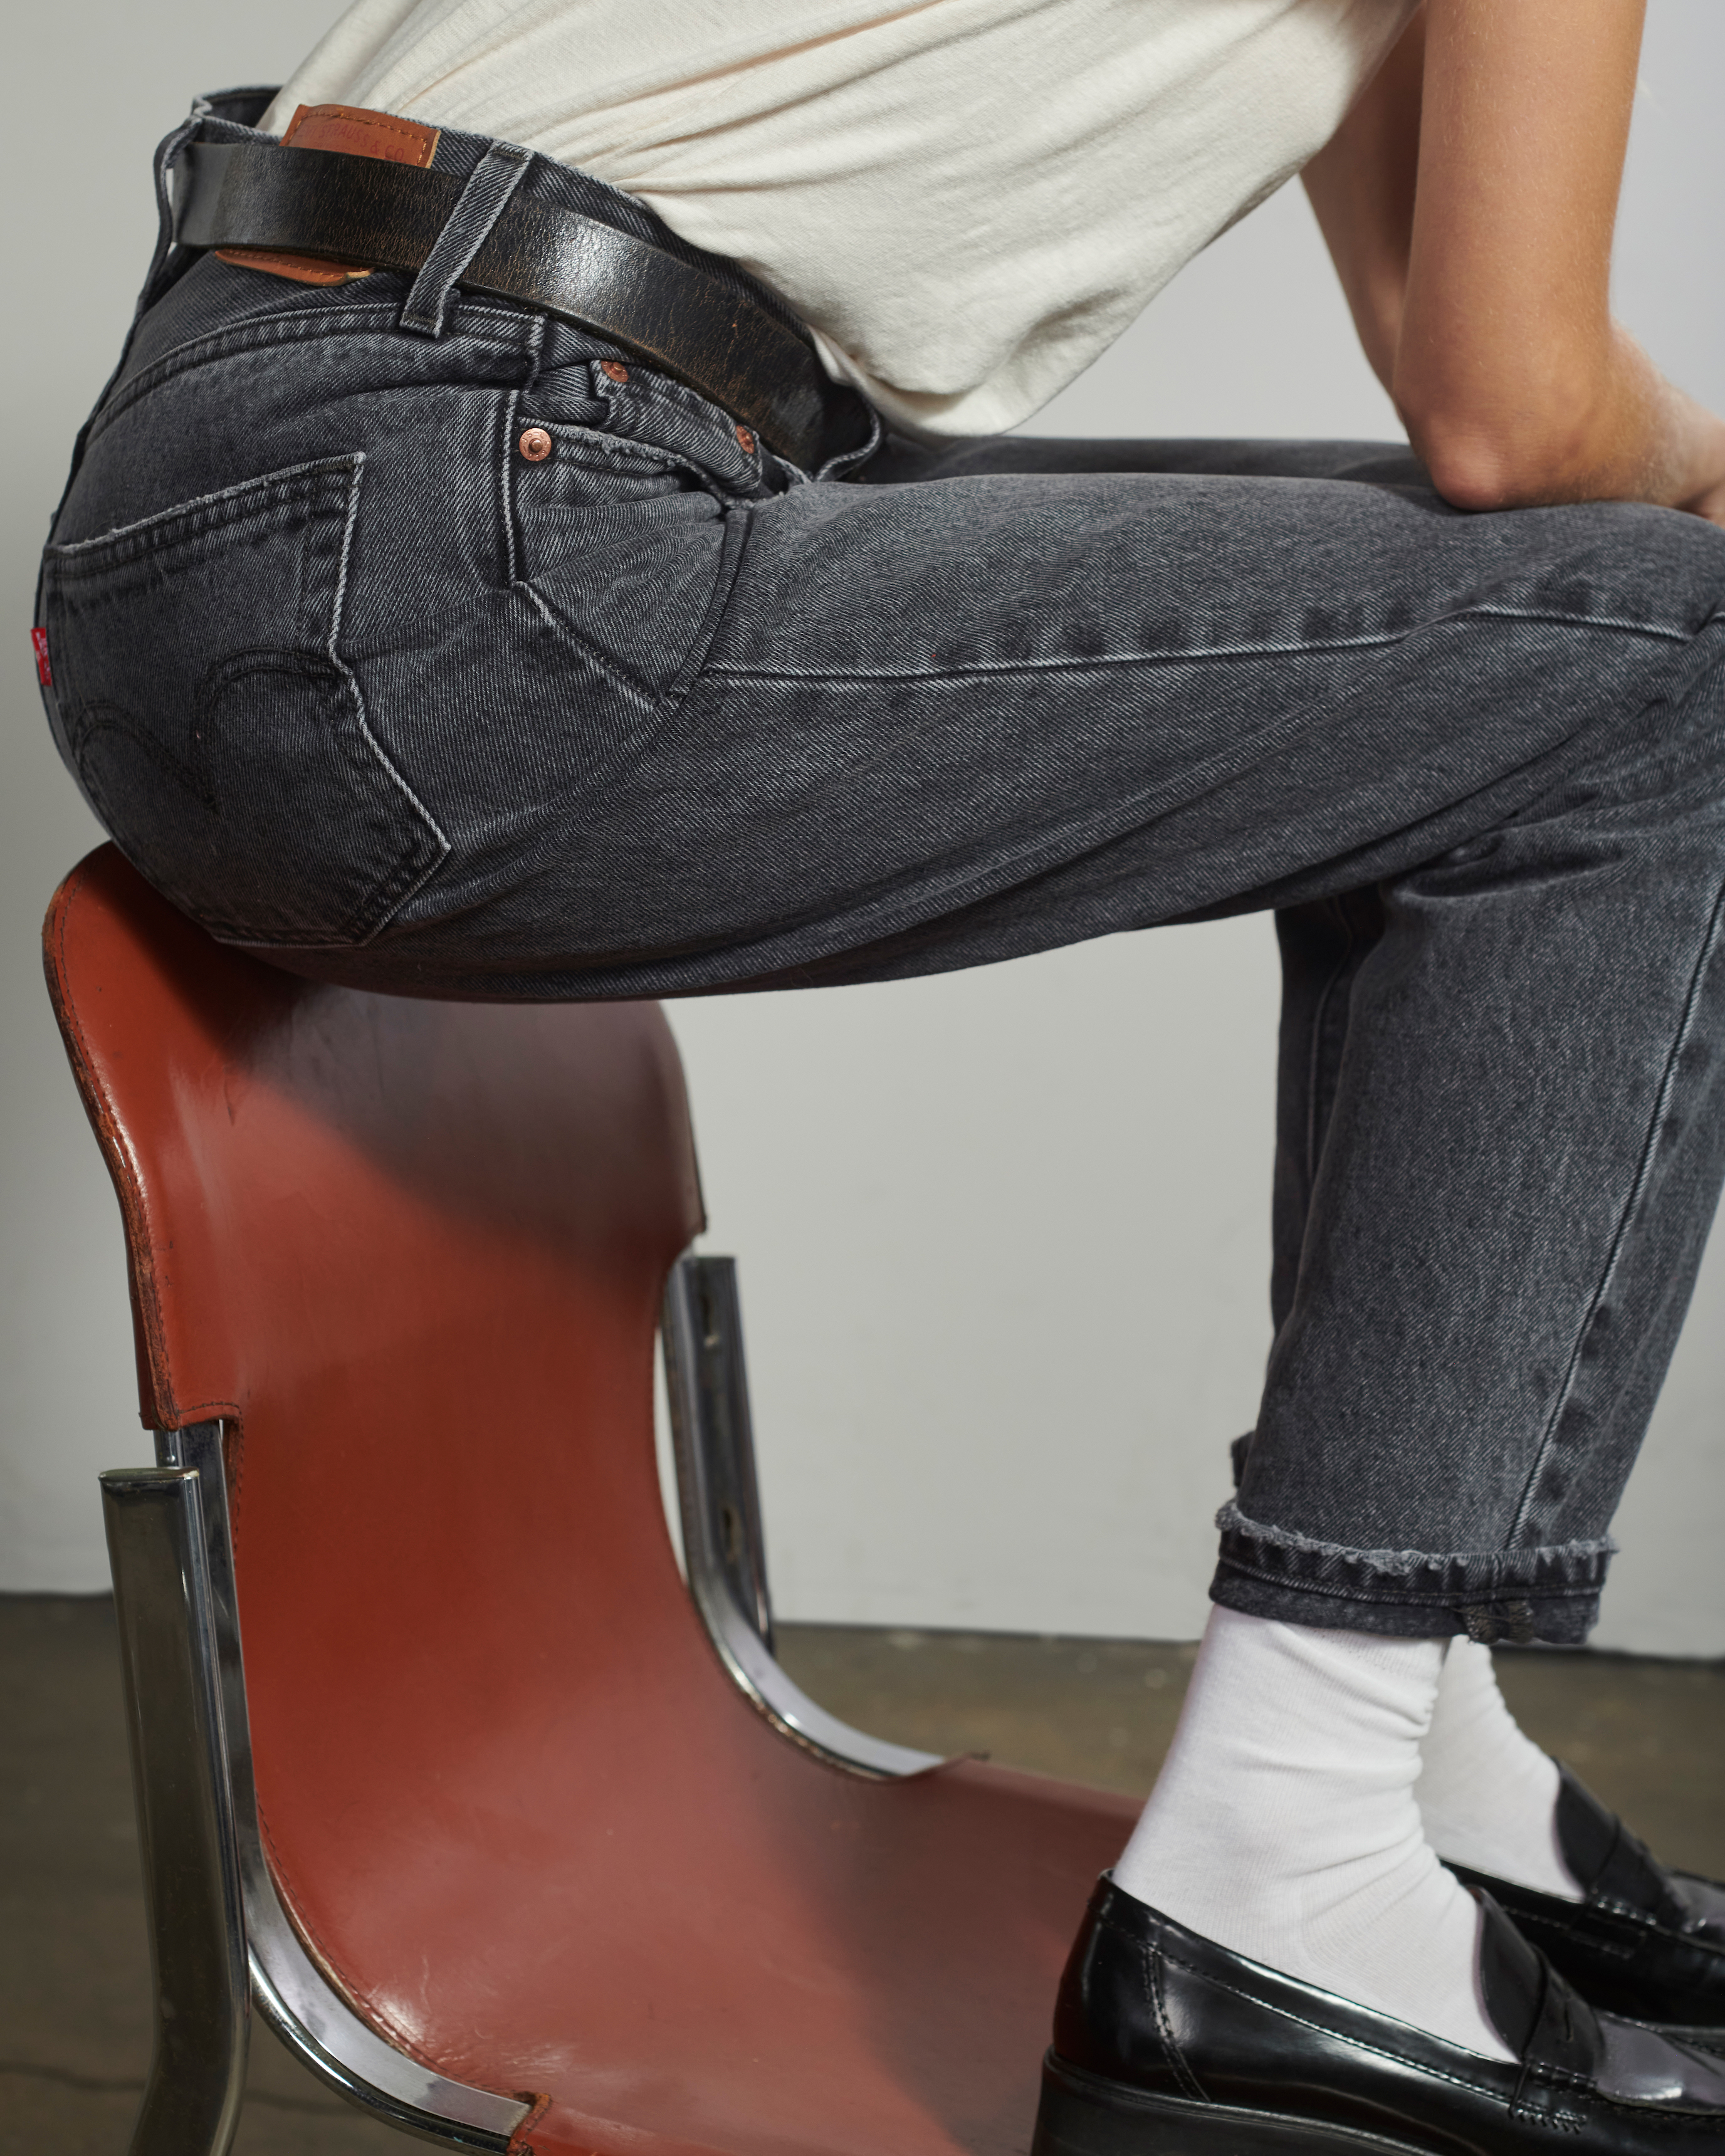 Image from Levi's (Provided to SAYS)